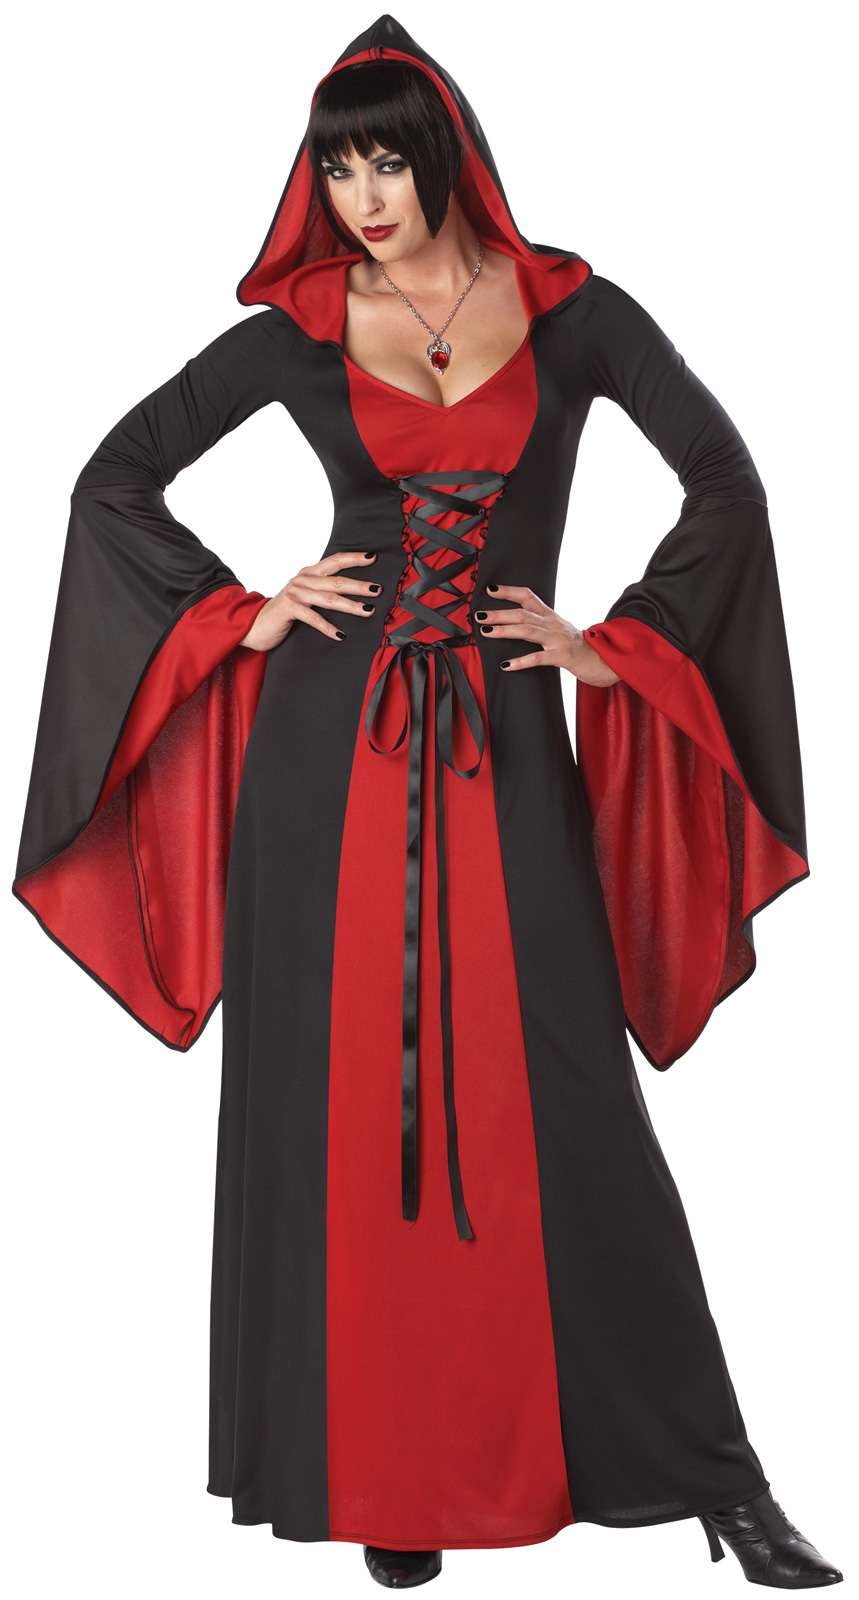 Deluxe Hooded Robe - PartyBell.com